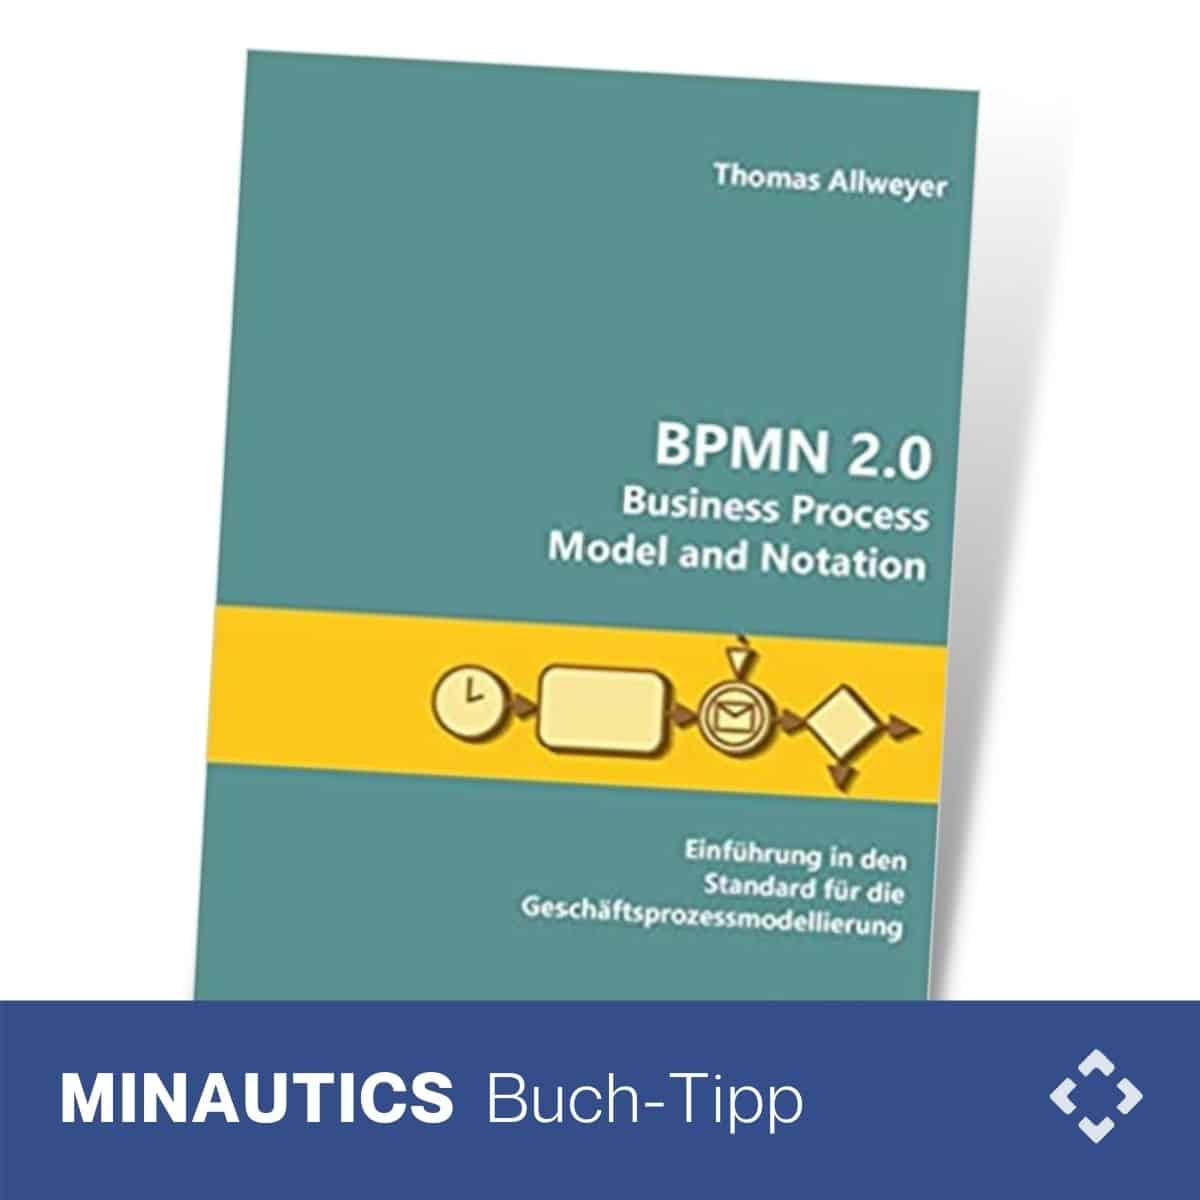 BPMN 2.0 – Business Process Model and Notation 0 (0)